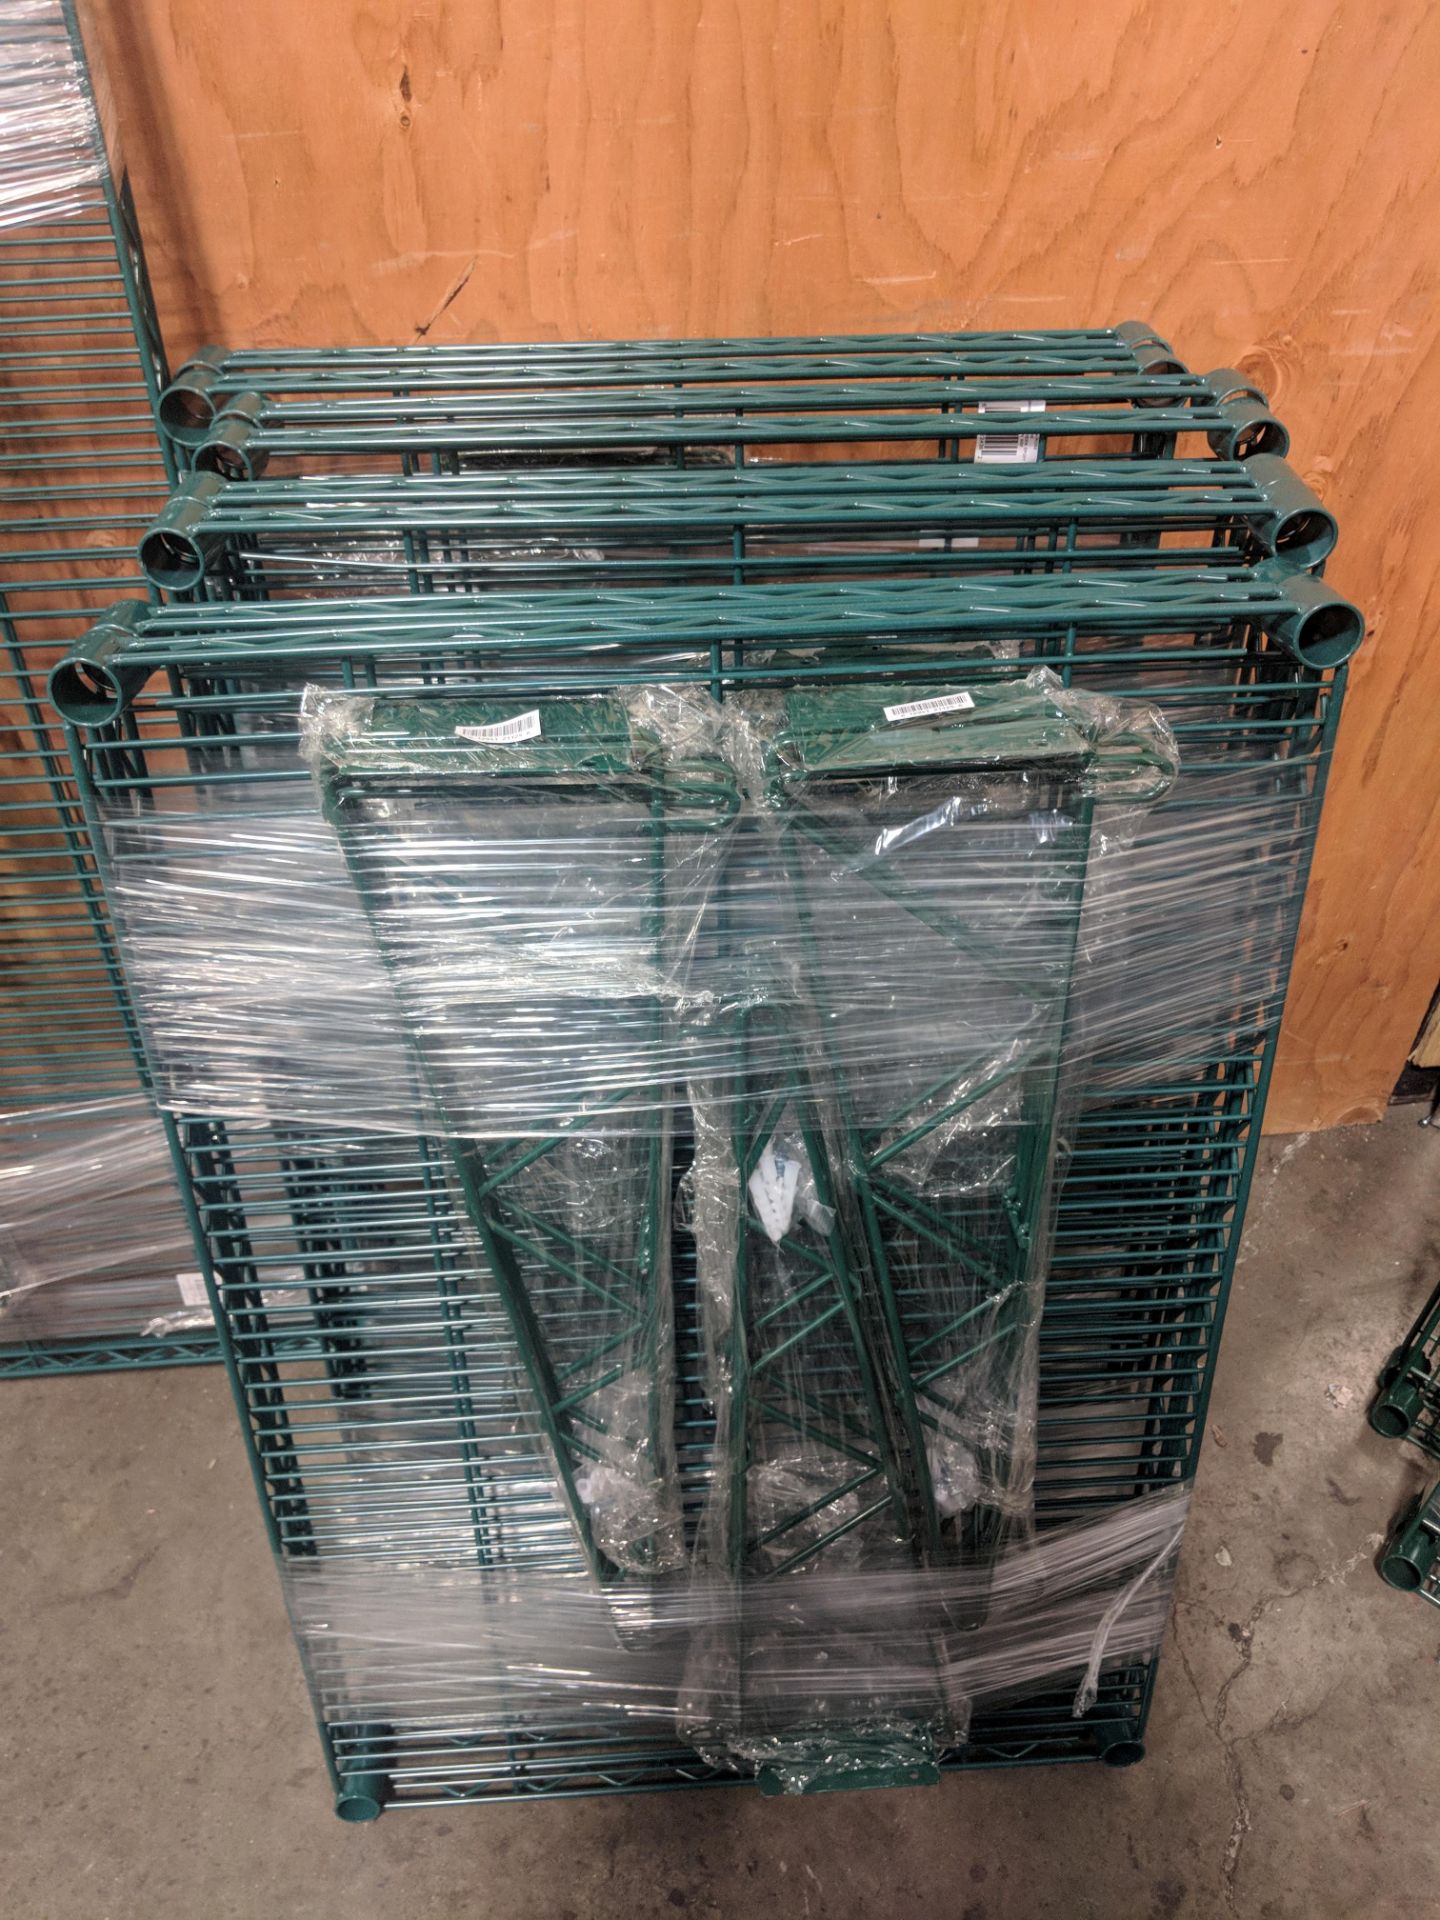 48" Epoxy Wire Shelving Section - Lot of 5 Pieces